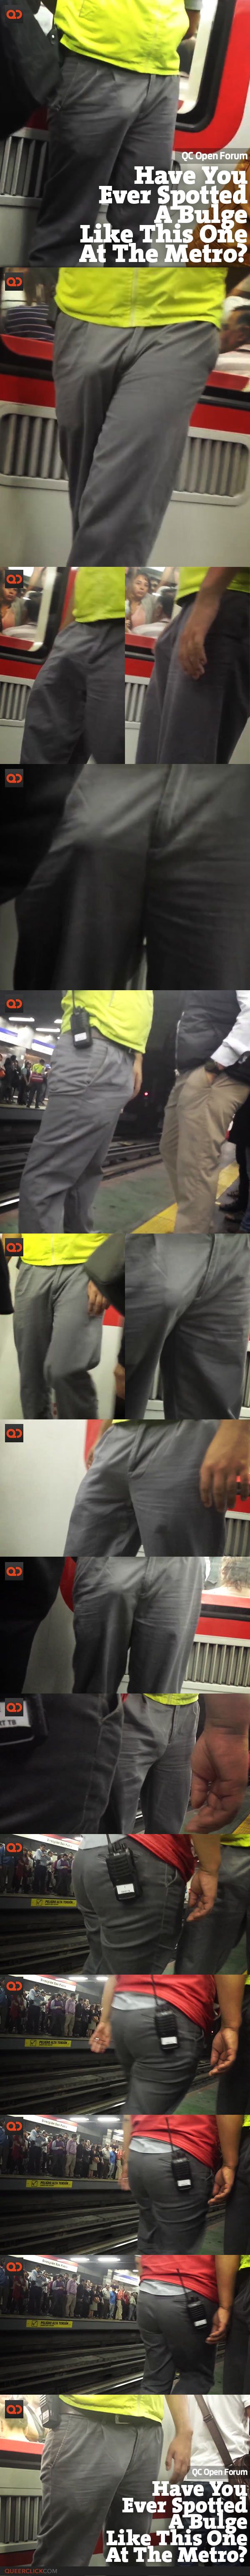 QC Open Forum: Have You Ever Spotted A Bulge Like This One At The Metro?